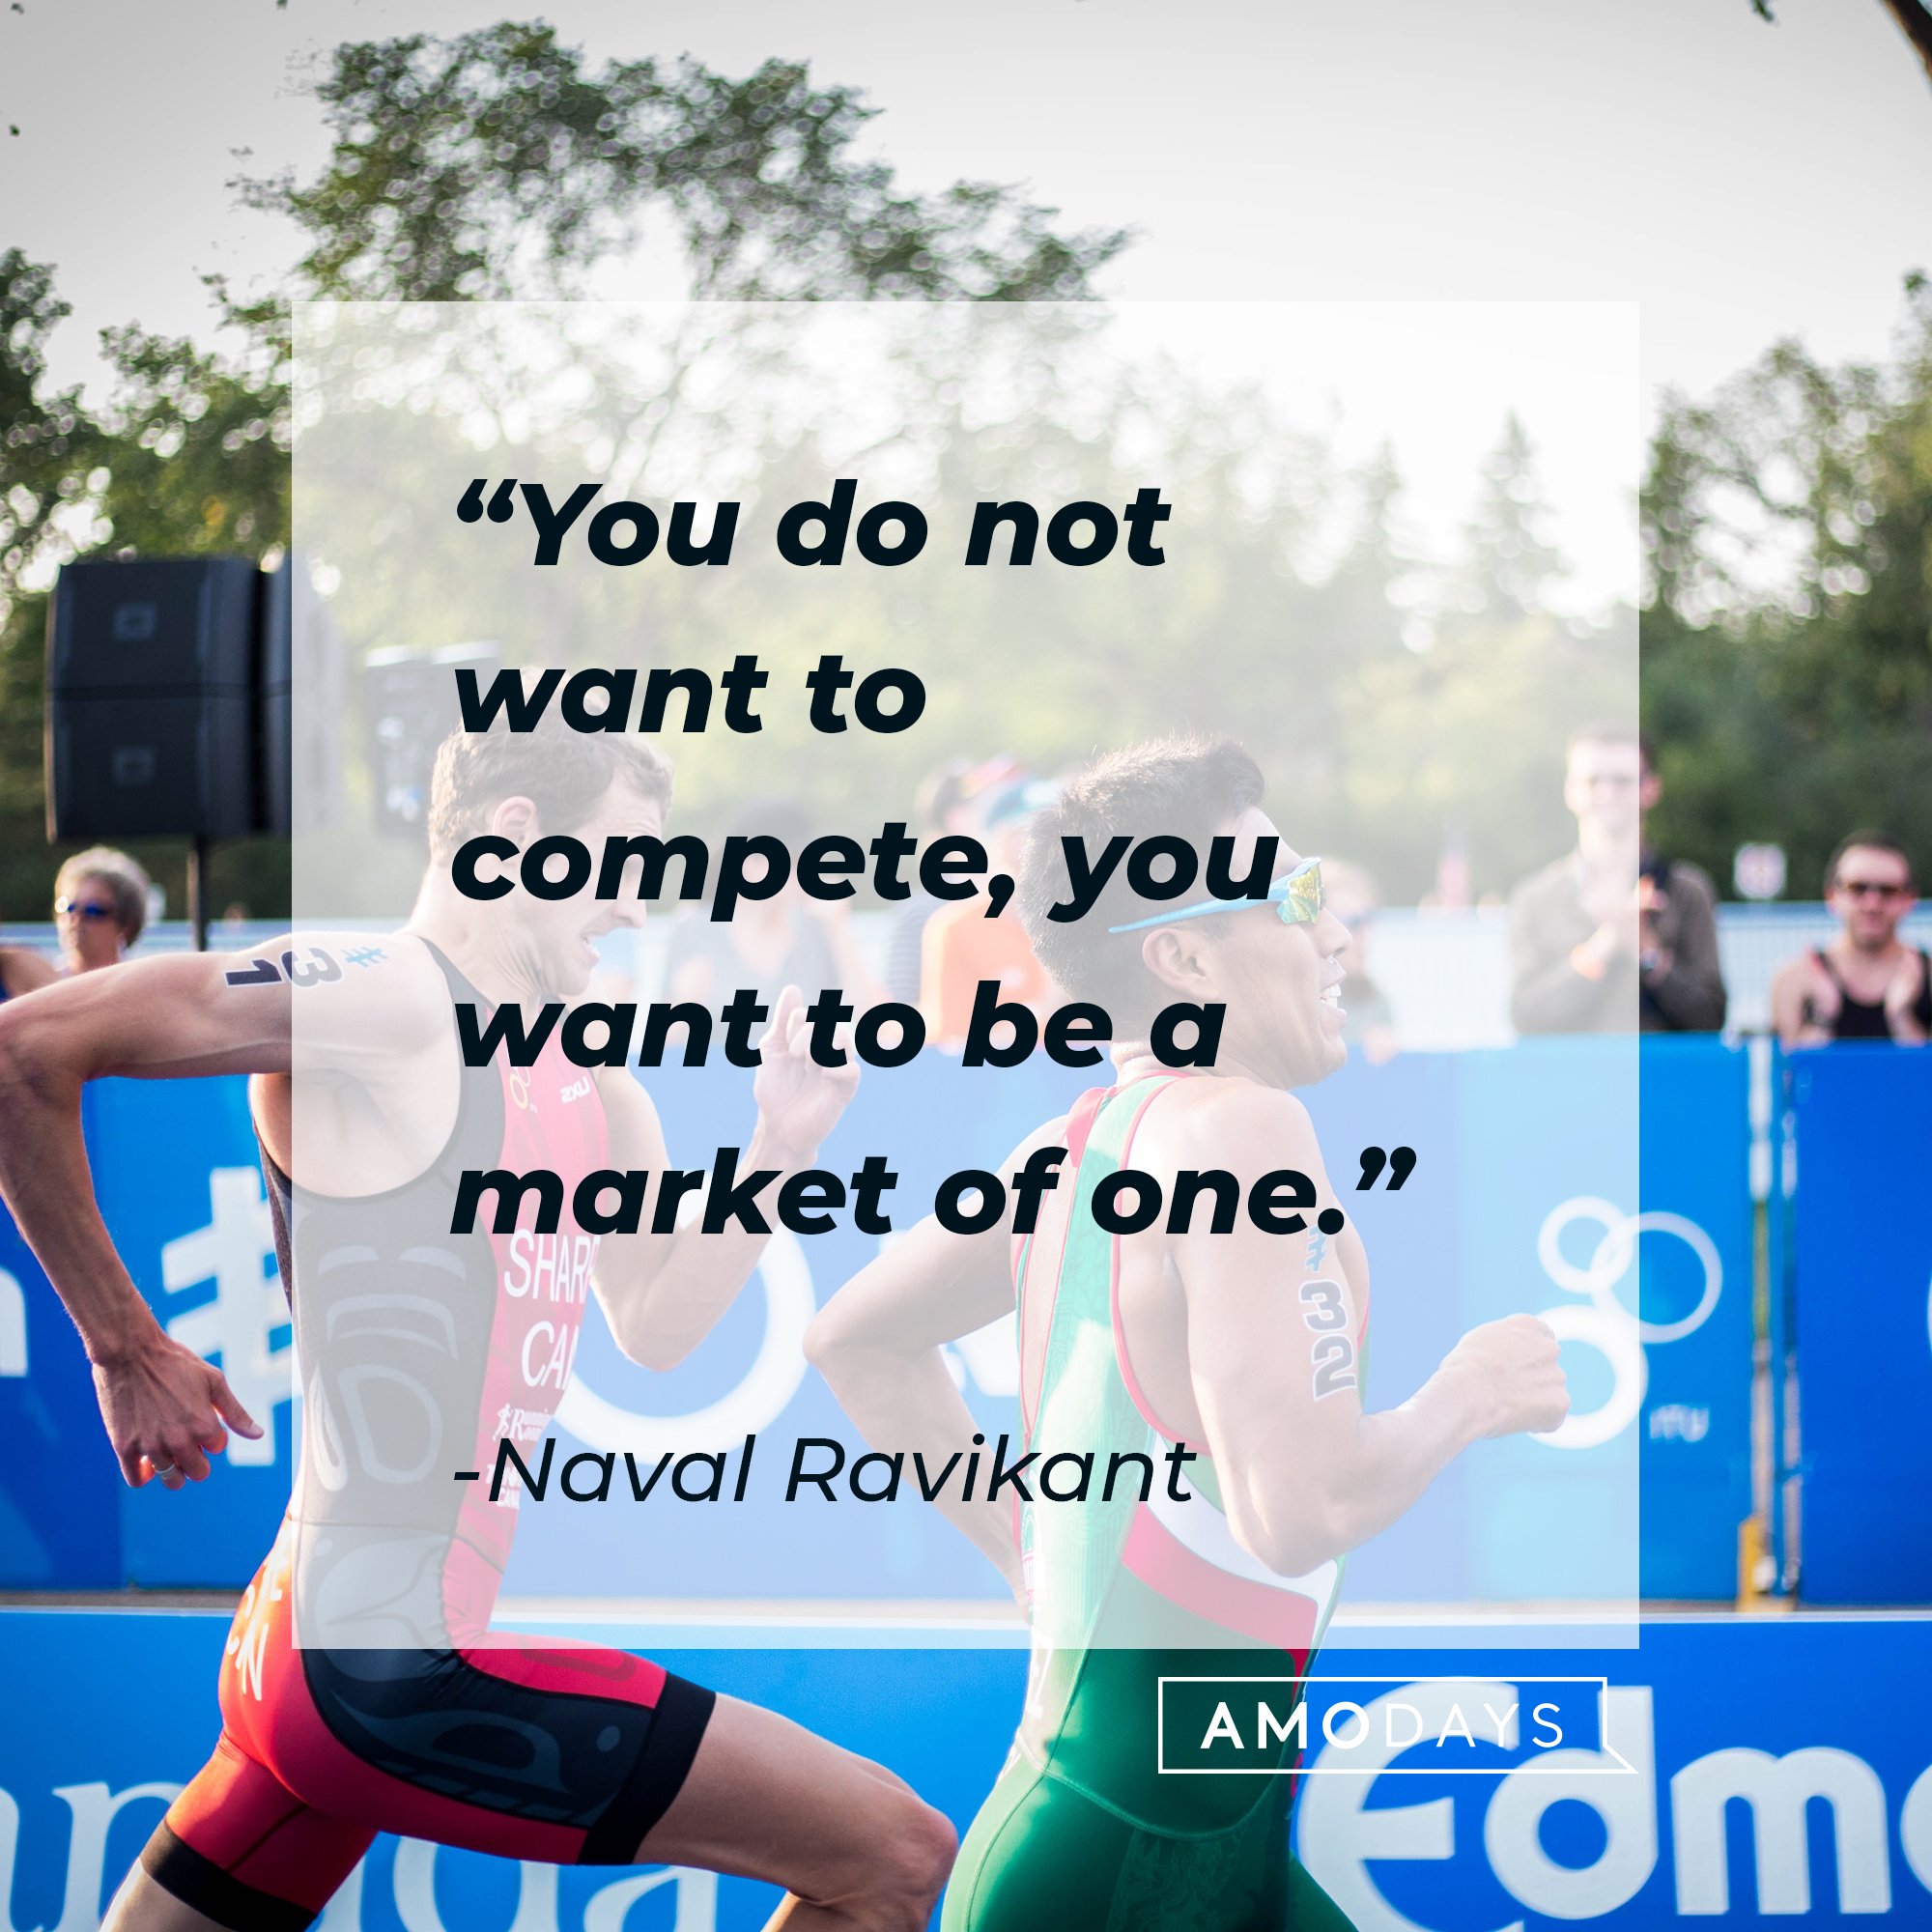 Naval Ravikant's quote: "You do not want to compete, you want to be a market of one."  | Image: AmoDays